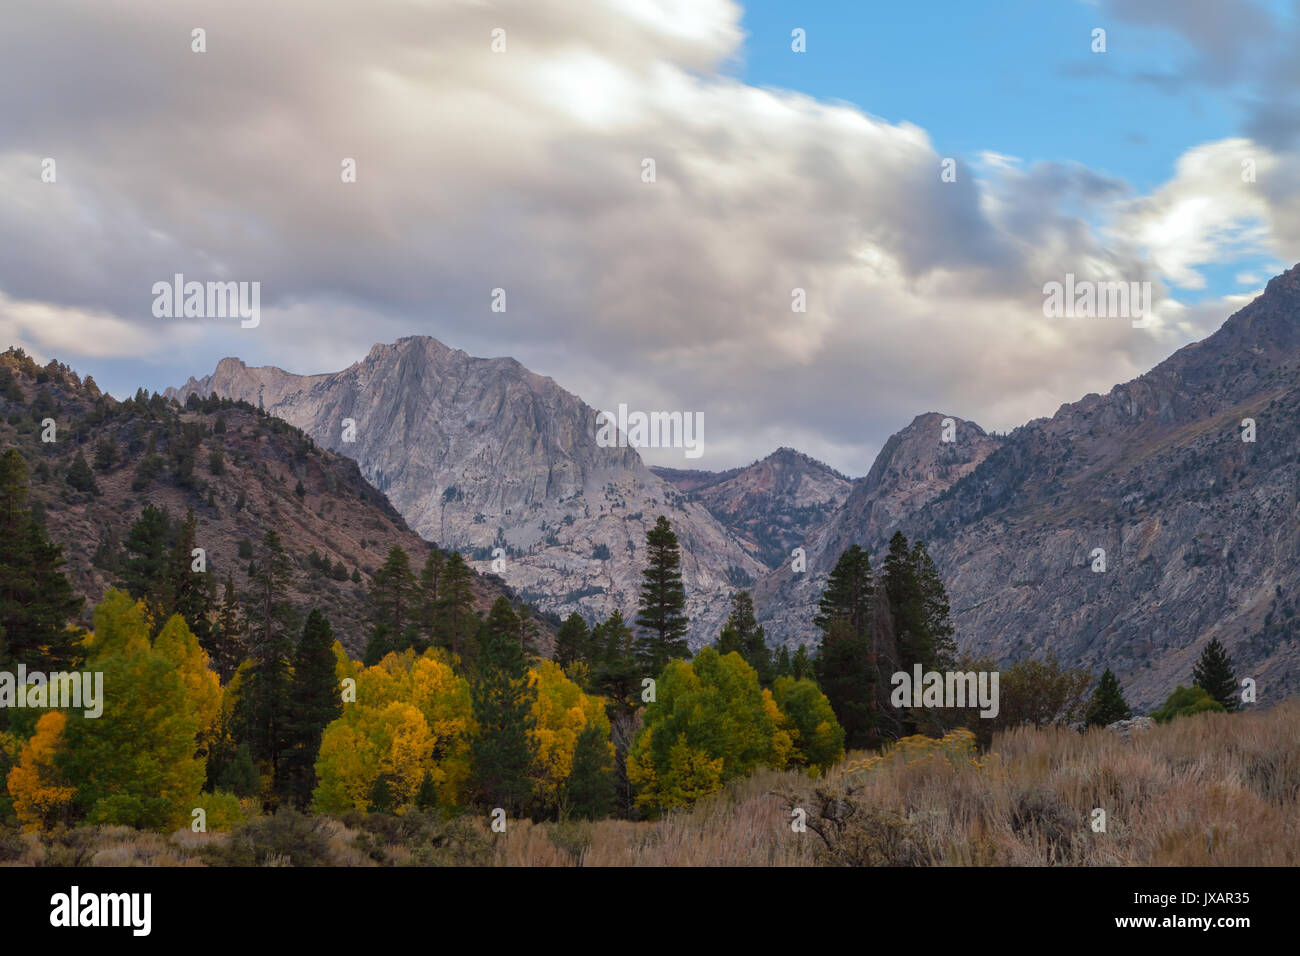 stormy clouds were covering the Eastern Sierra Mountains at June Lake on an early autumn evening, California, USA. Stock Photo